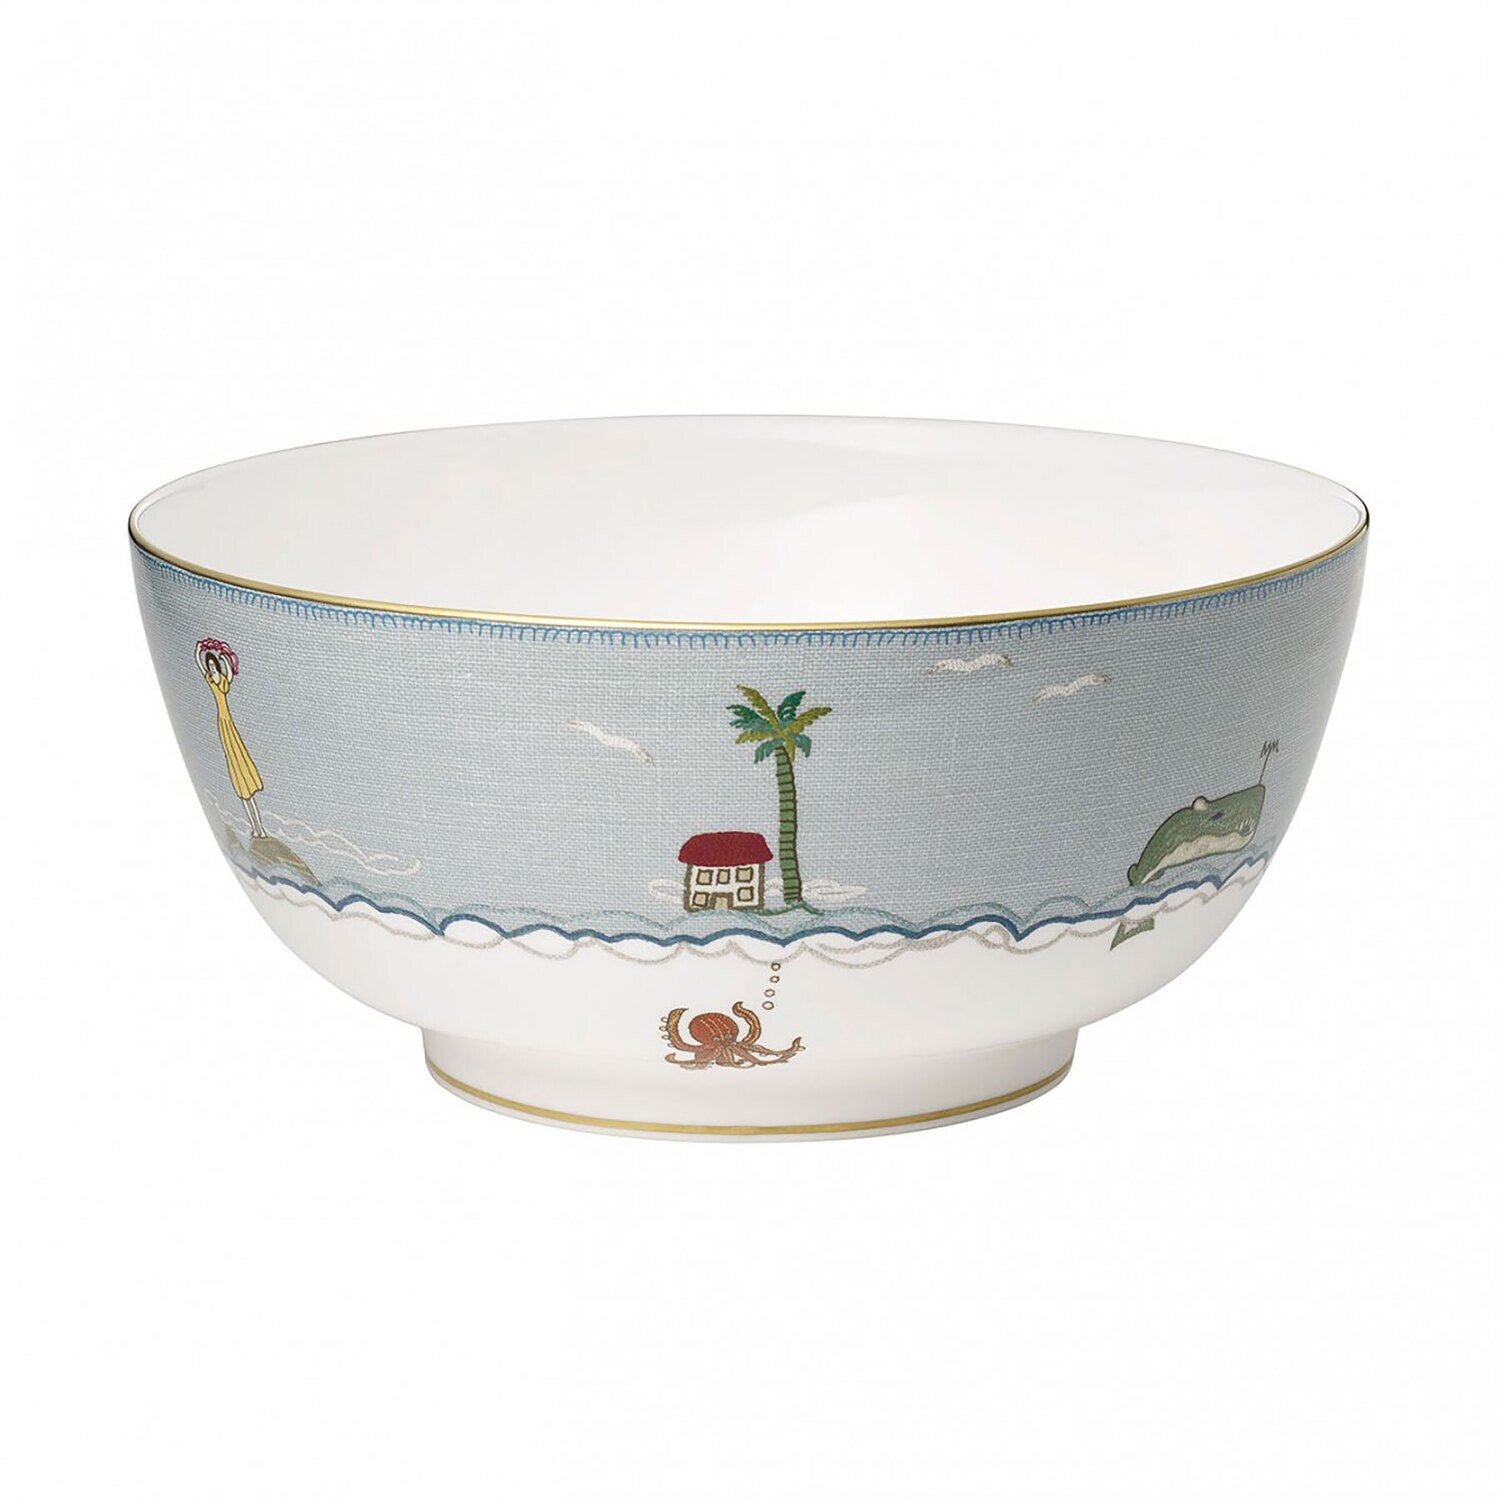 Wedgwood Sailors Farewell Serving Bowl 10.2 Inch 1050207